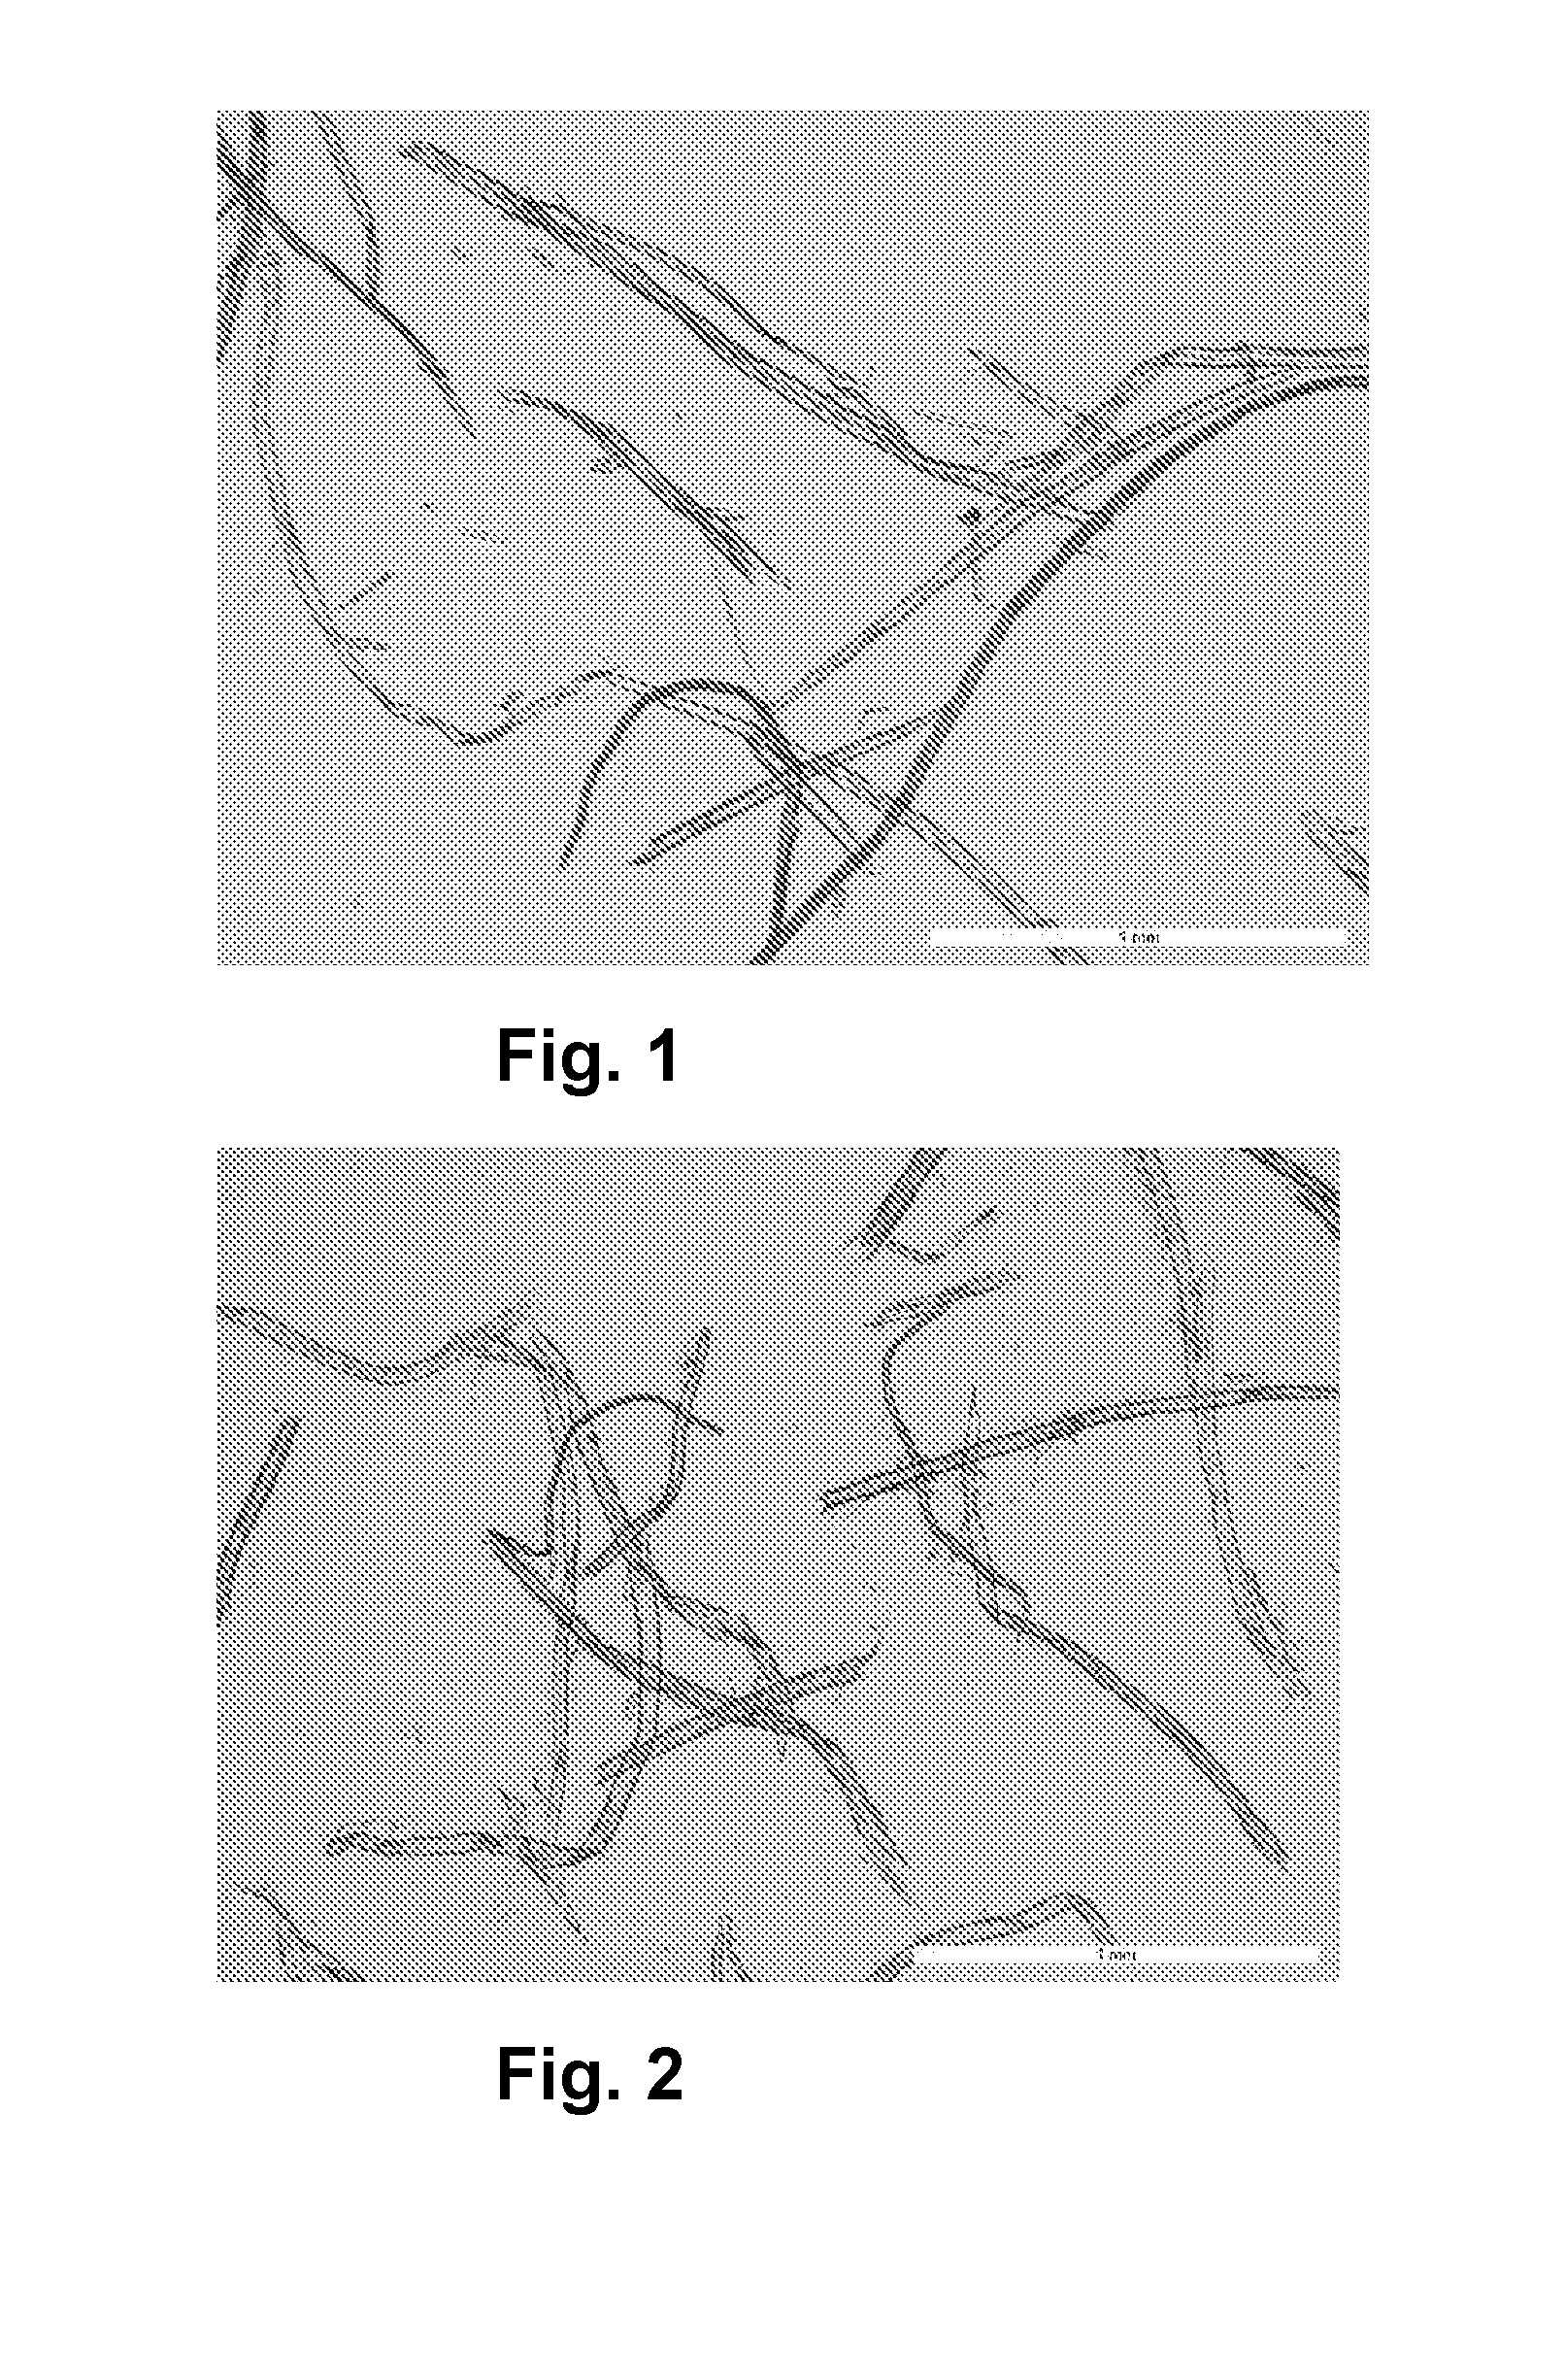 A method of producing oxidized or microfibrillated cellulose